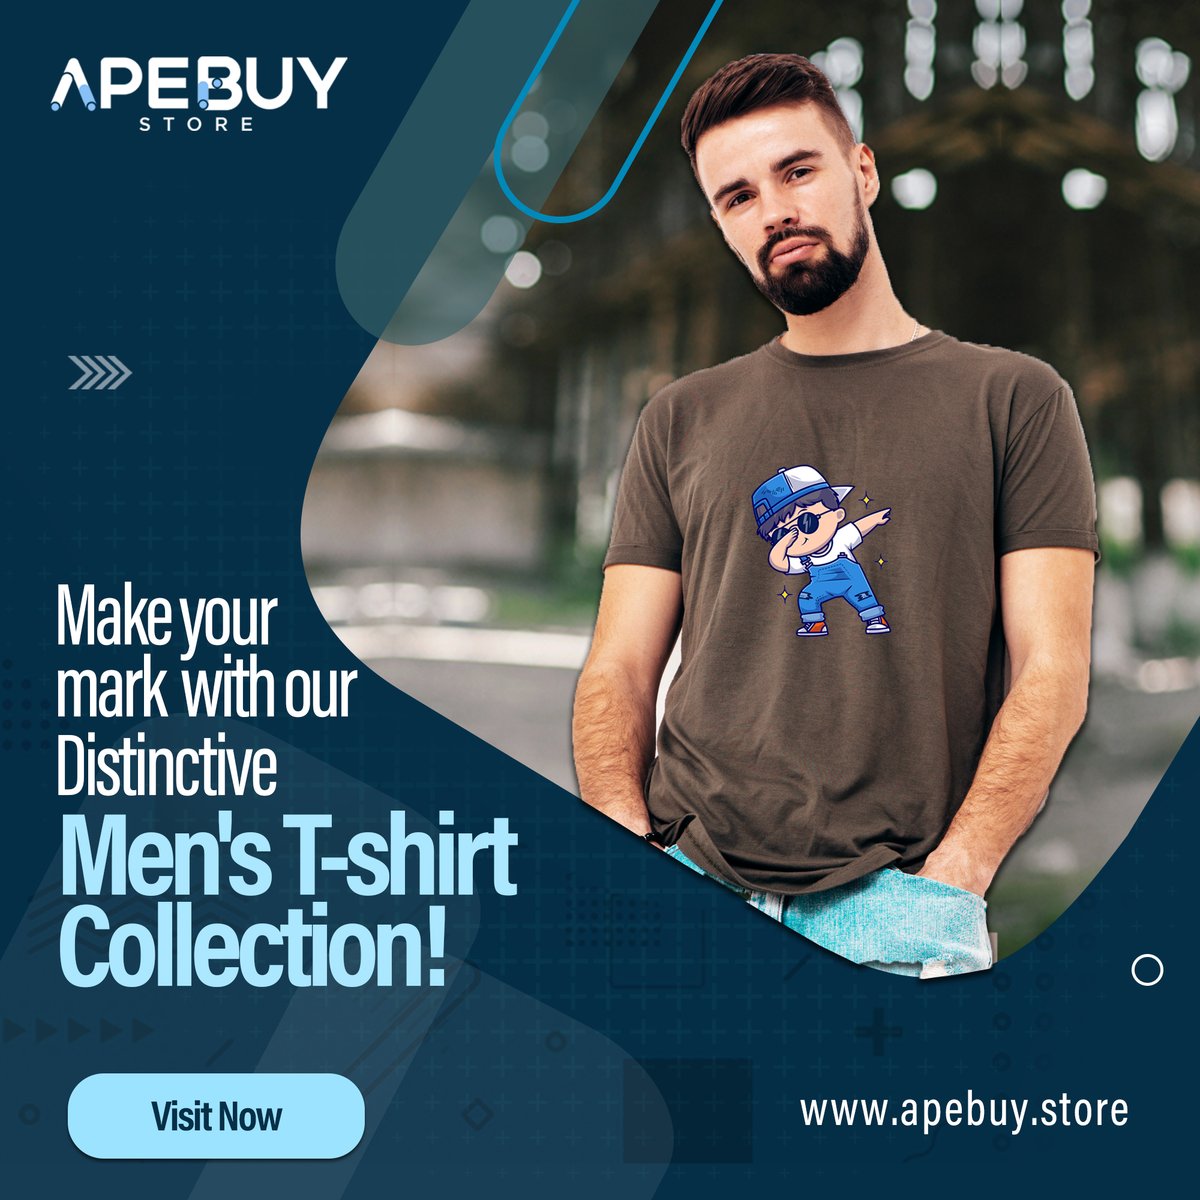 With our distinctive #menstshirt collection, you can feel the rush of standing out, and our distinctive t-shirt collection will help you leave your imprint. Shopping now!
#ApeBuy #MensFashion #MensTShirts #Trendycollection #PersonalExpression #DistinctiveFashion #UniqueFashion